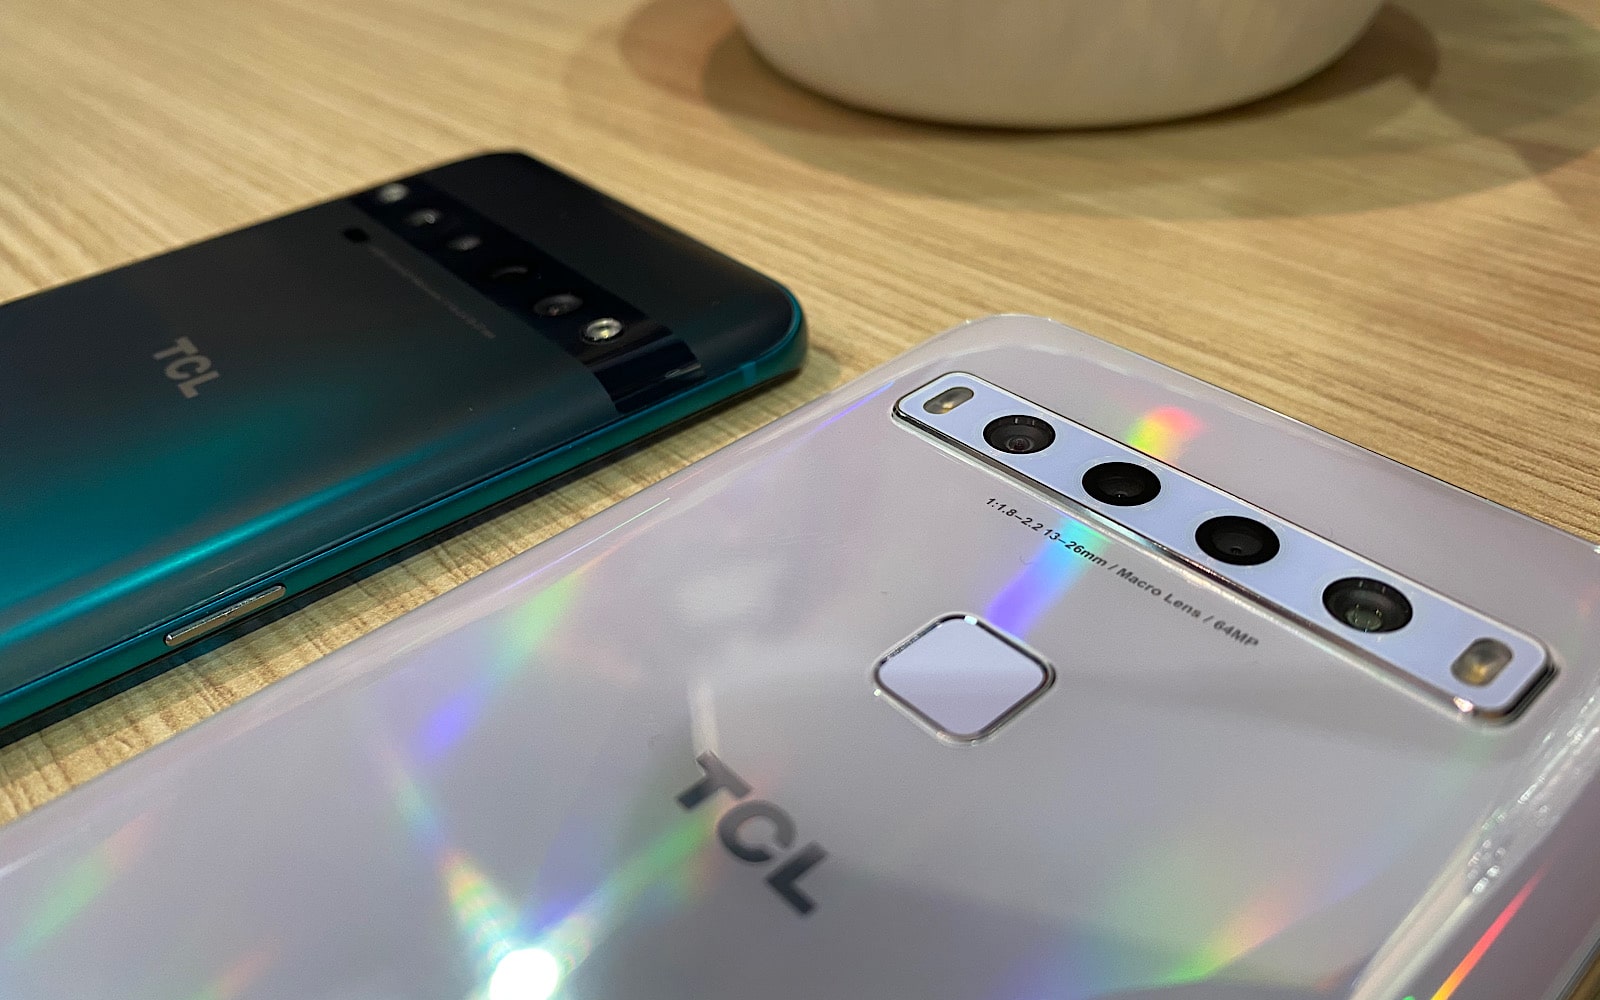 Hands-on with the TCL 10 Pro and TCL 10 5G at CES 2020